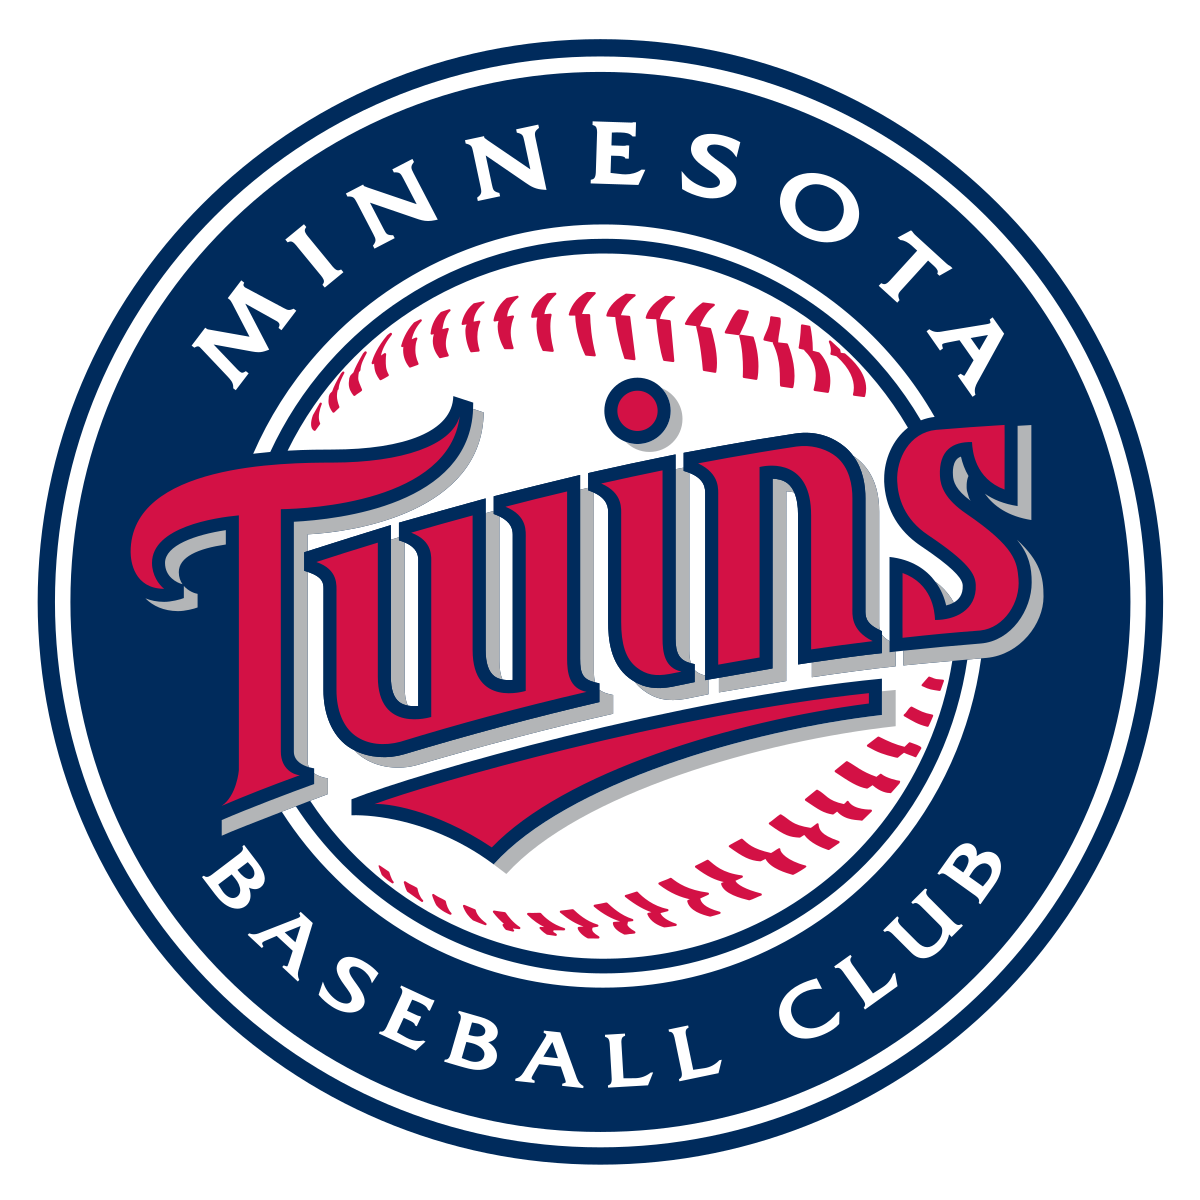 The Minnesota Twins have started their 2022 after having a surprising off-season.